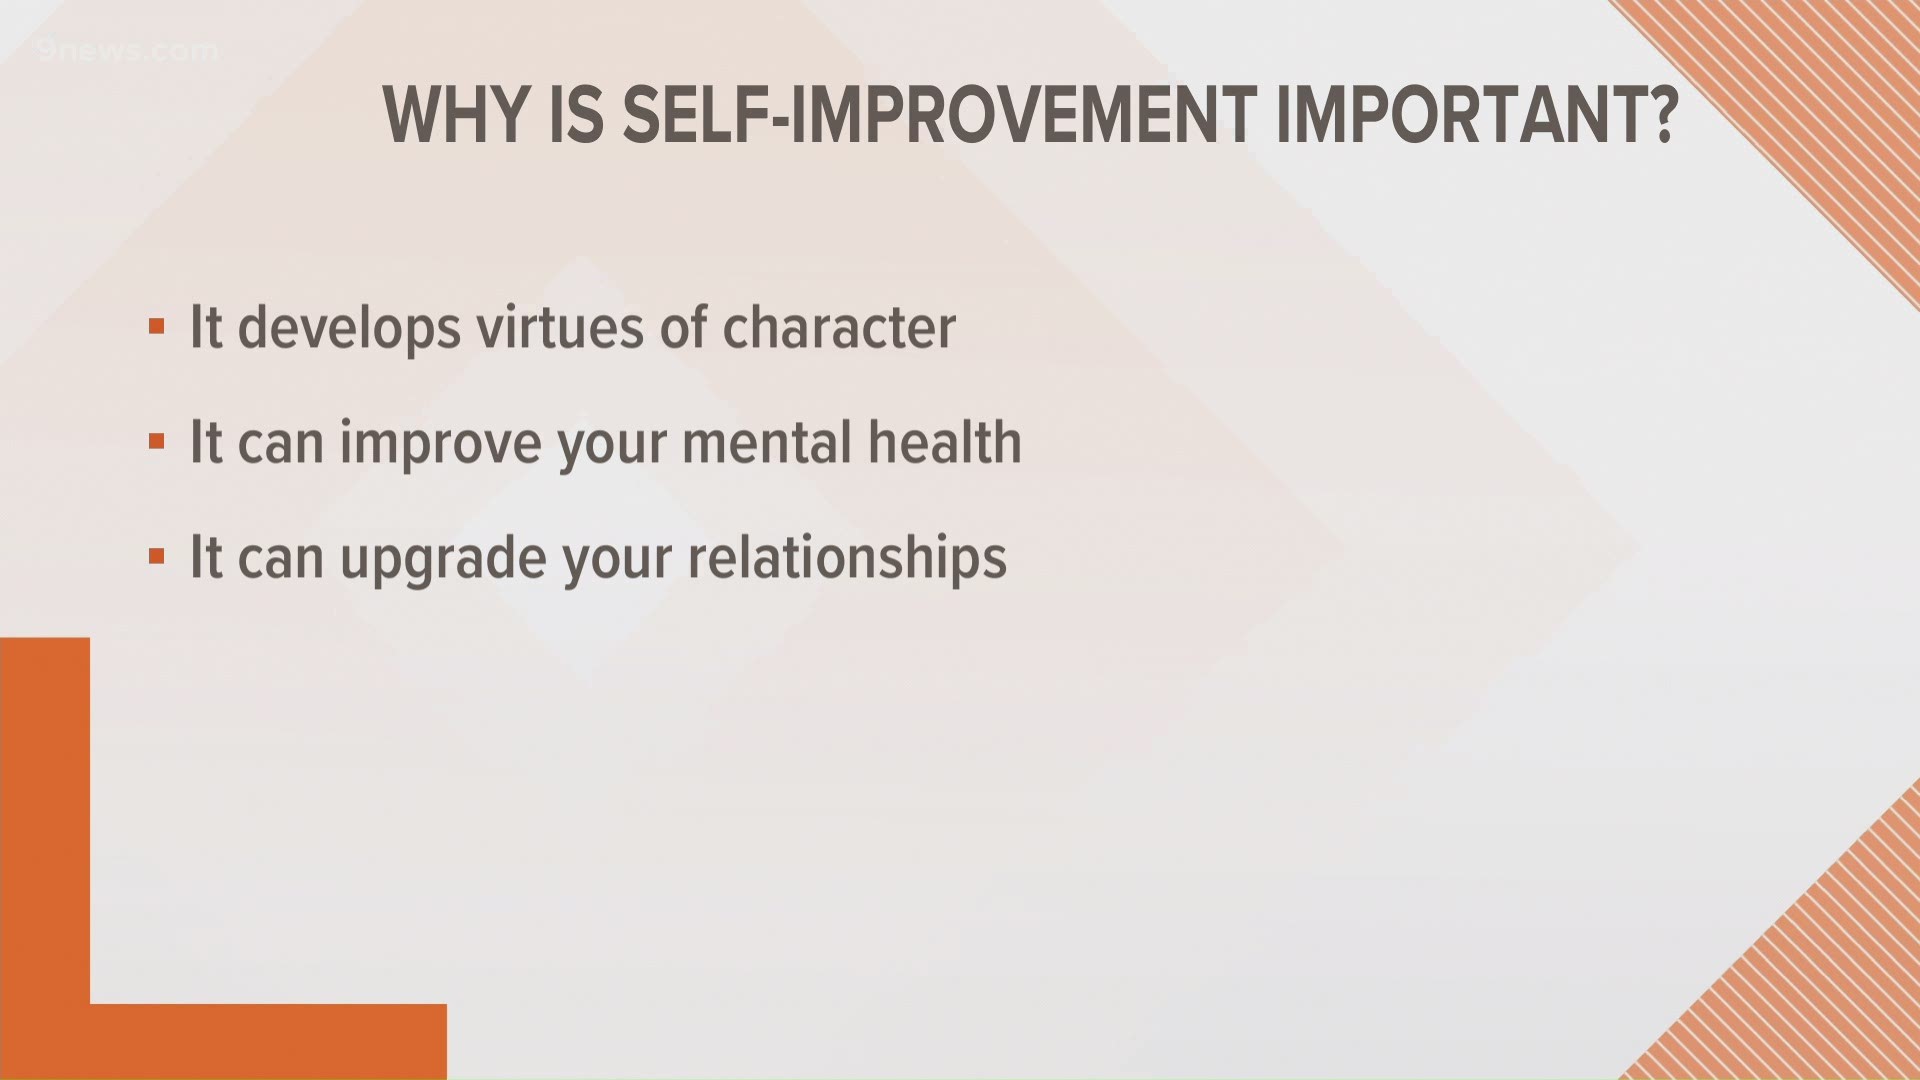 Licensed clinical social worker and psychotherapist Heather Hans shares some of the reasons why self-improvement is so important.